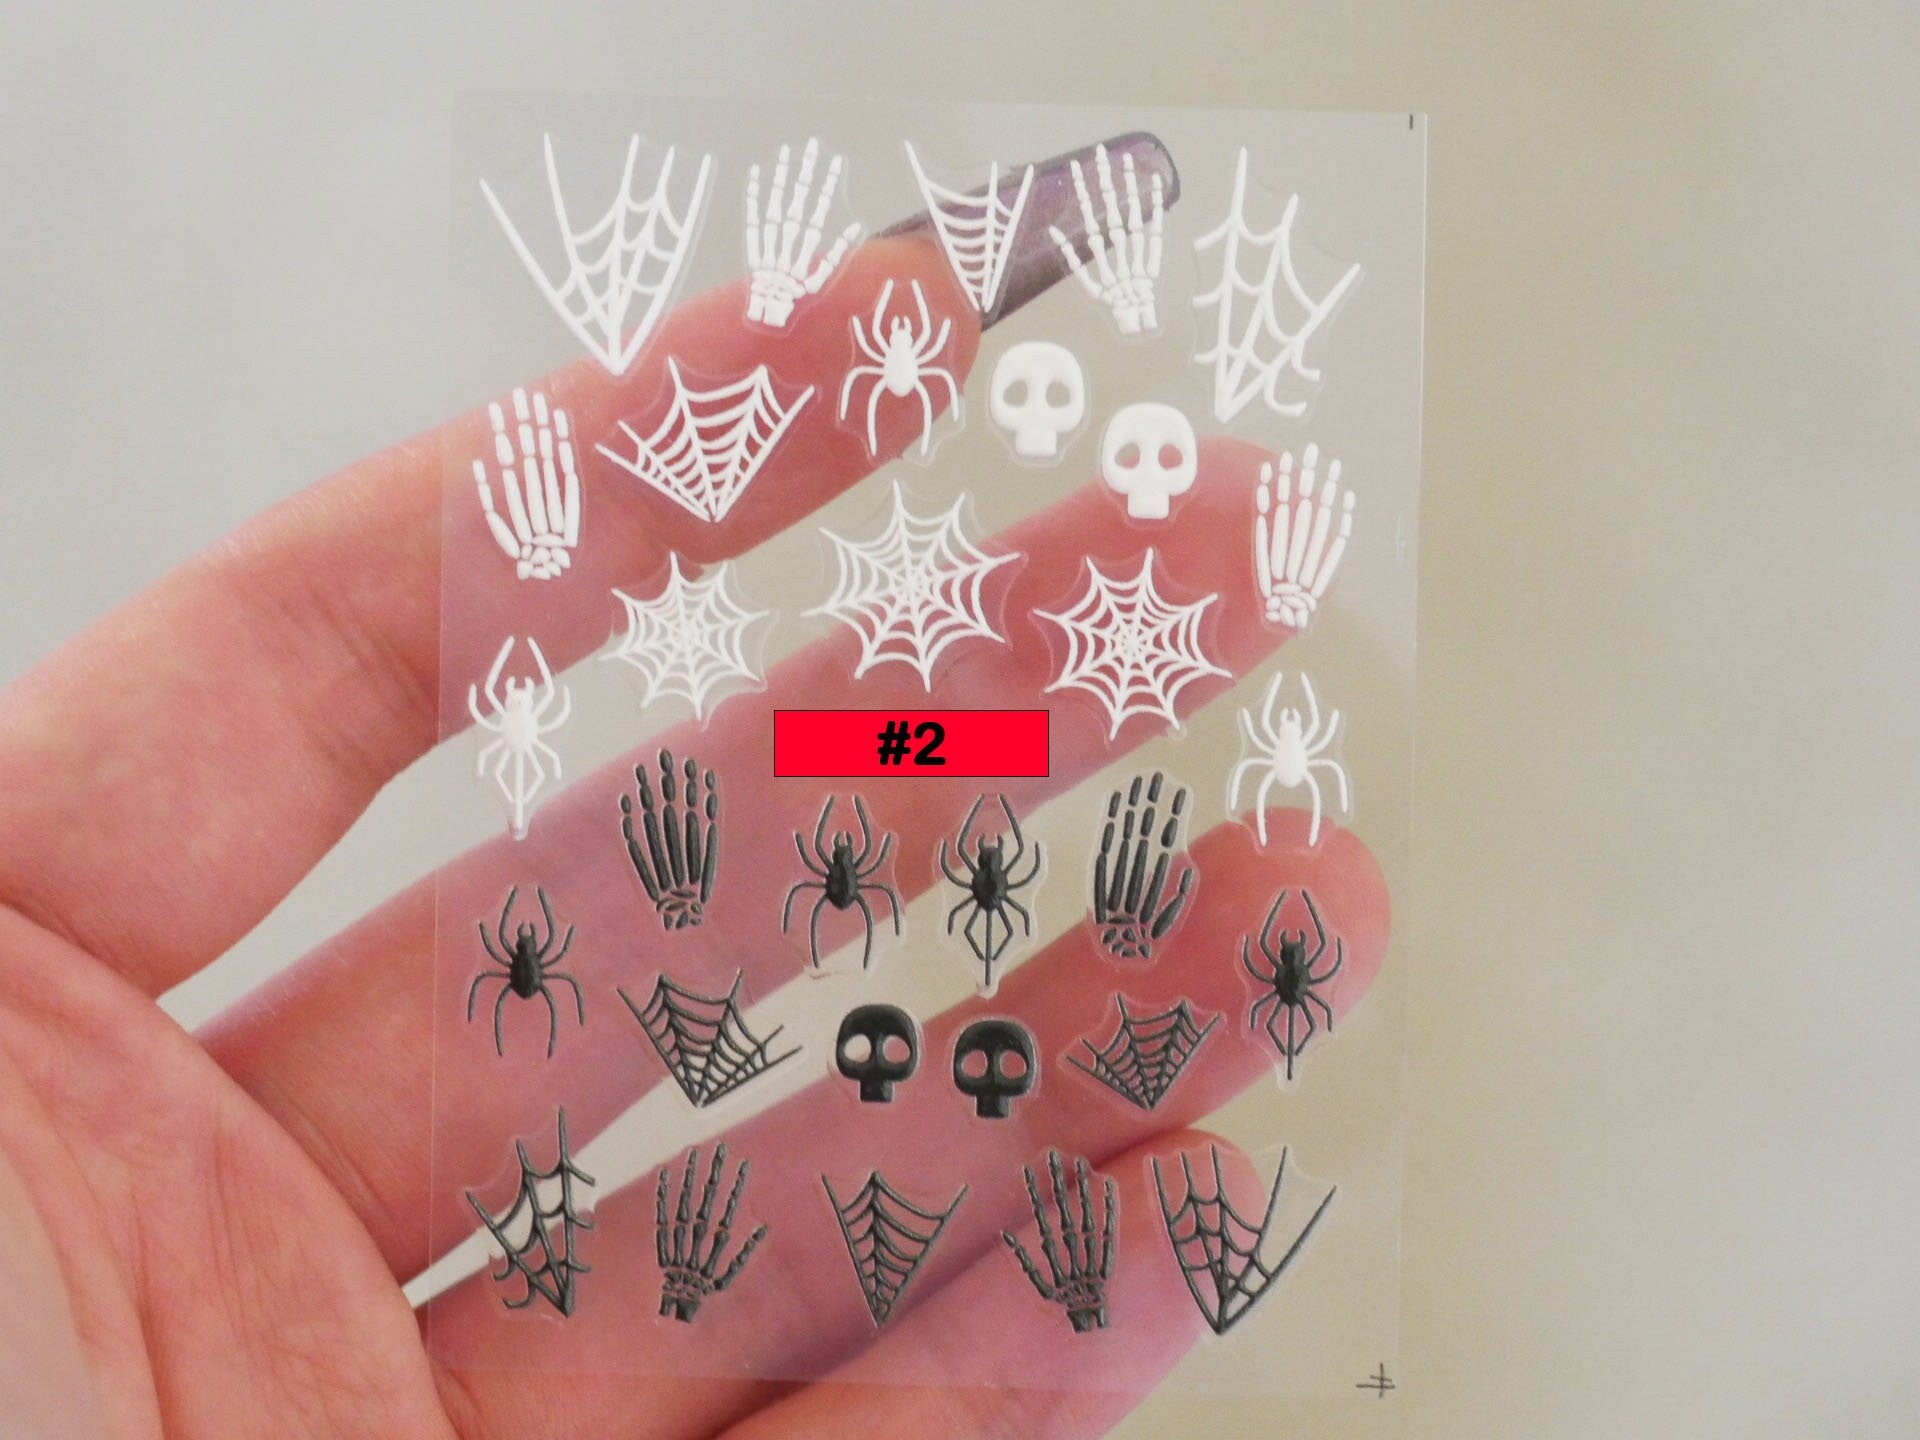 3D Halloween Embossed Spooky Nail Stickers/ Creepy Crawlers Nails Art Sticker/ Spider Eye ball Haunted Manicure Creepy Nails Ghostly Nail